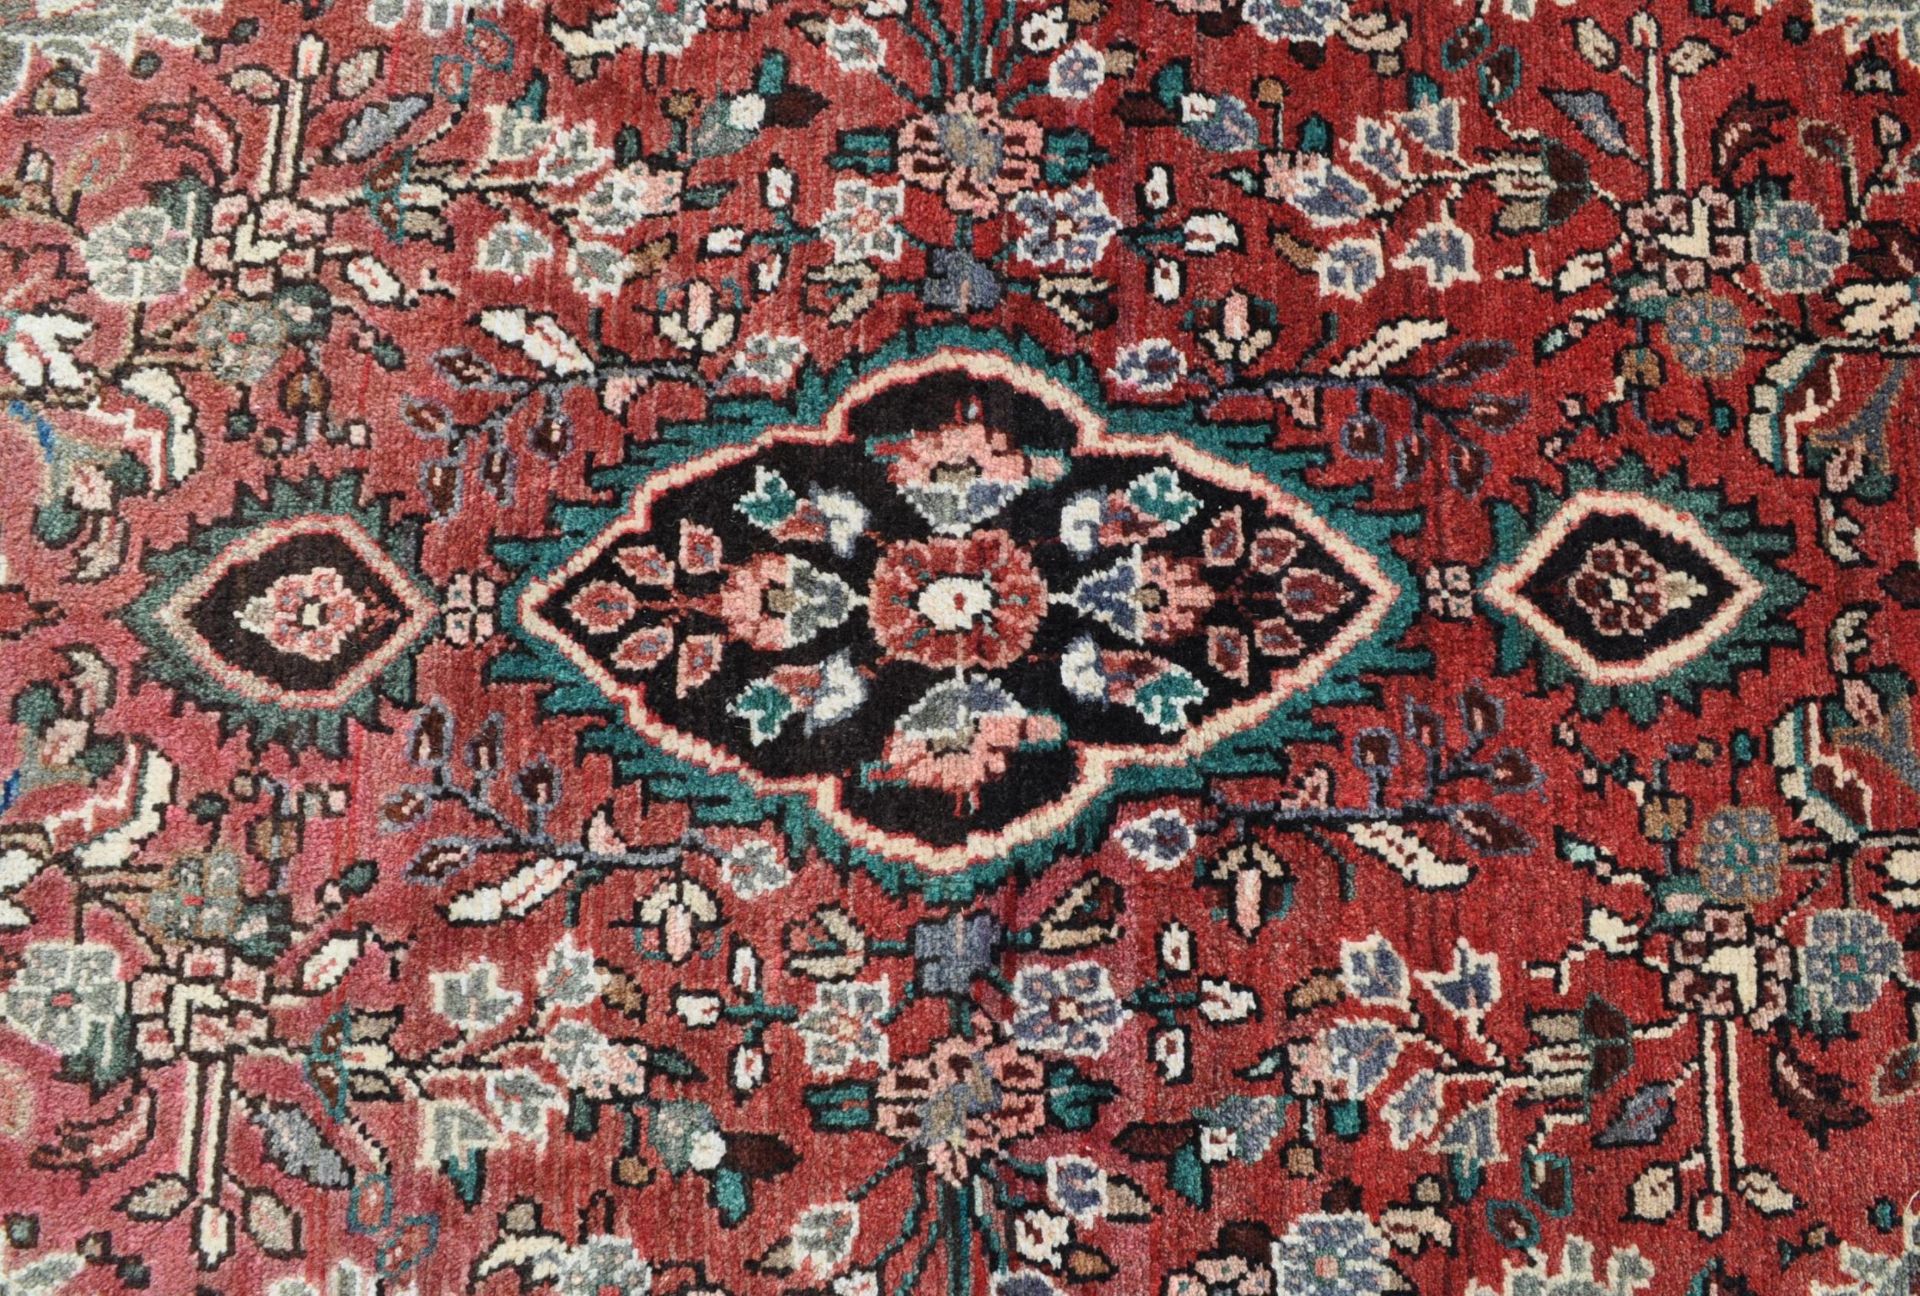 20TH CENTURY NORTH WEST PERSIAN BORCHALUE RUG - Image 2 of 3